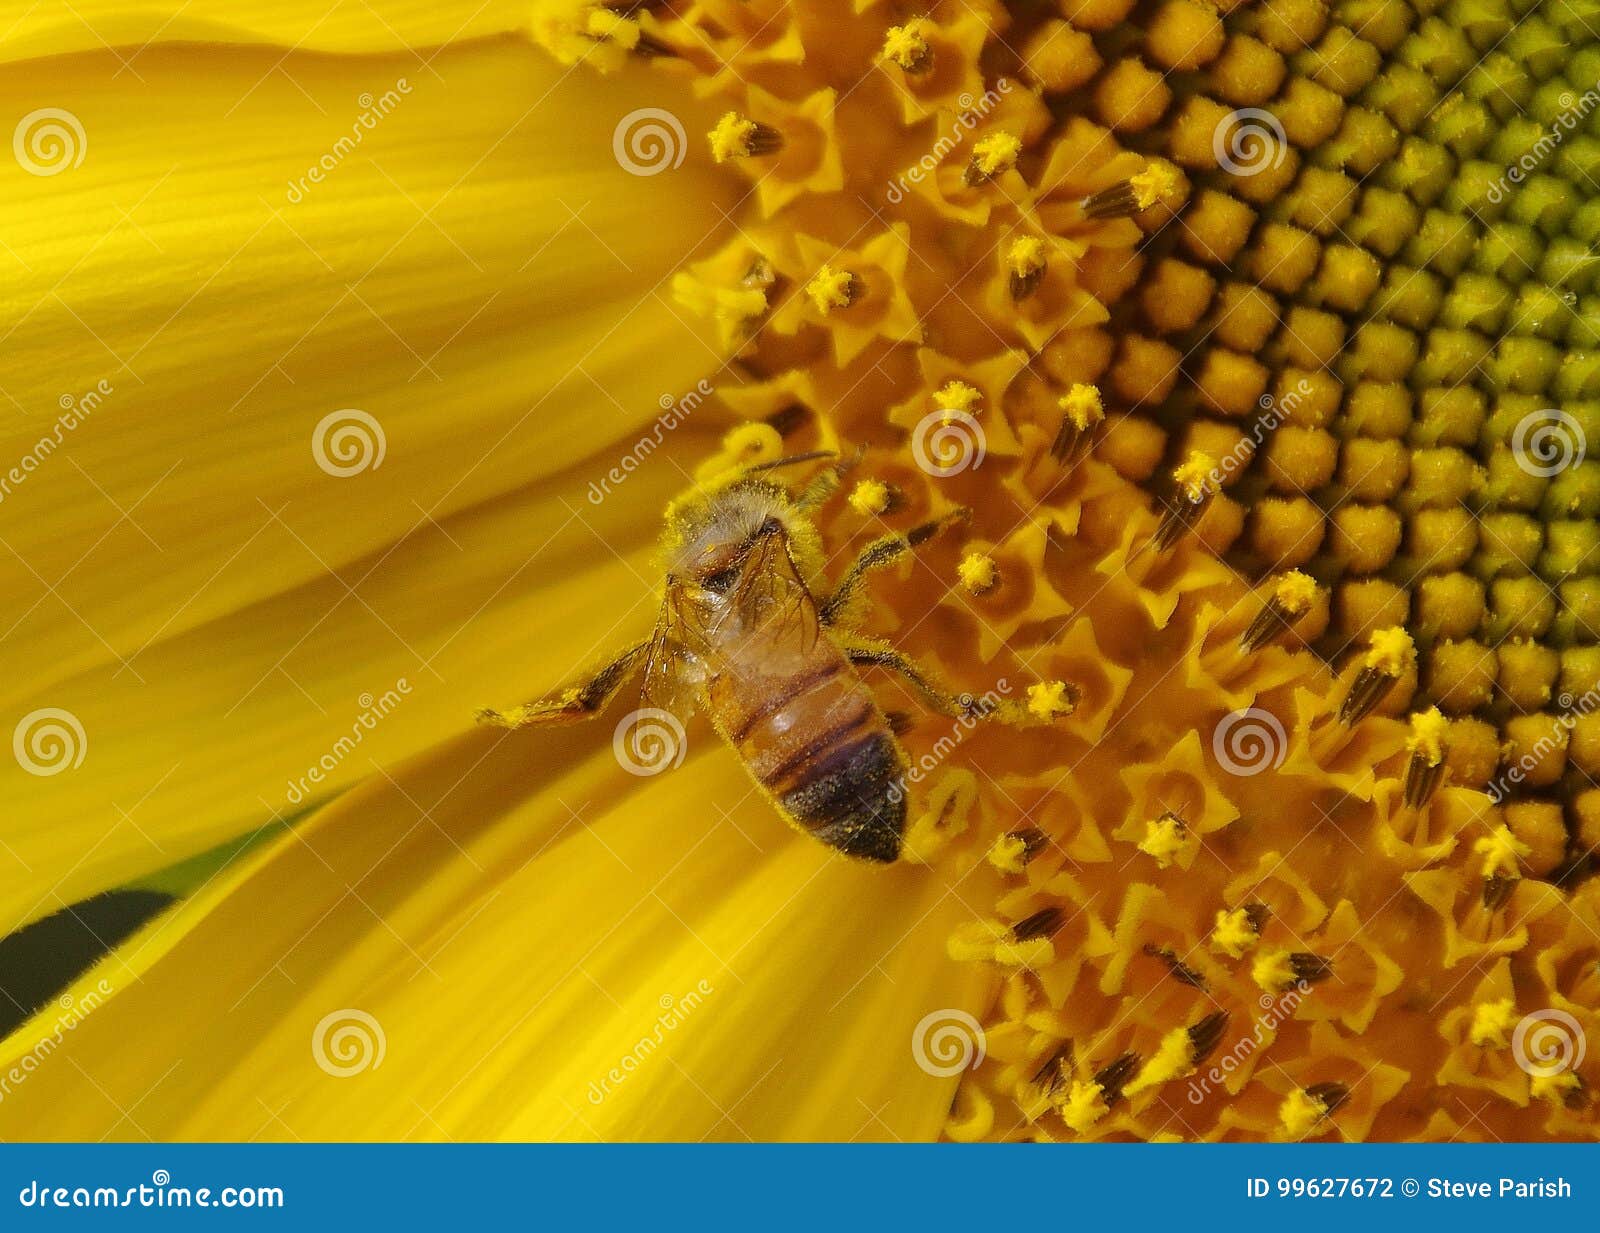 bee on sunflower heavily laden with pollen